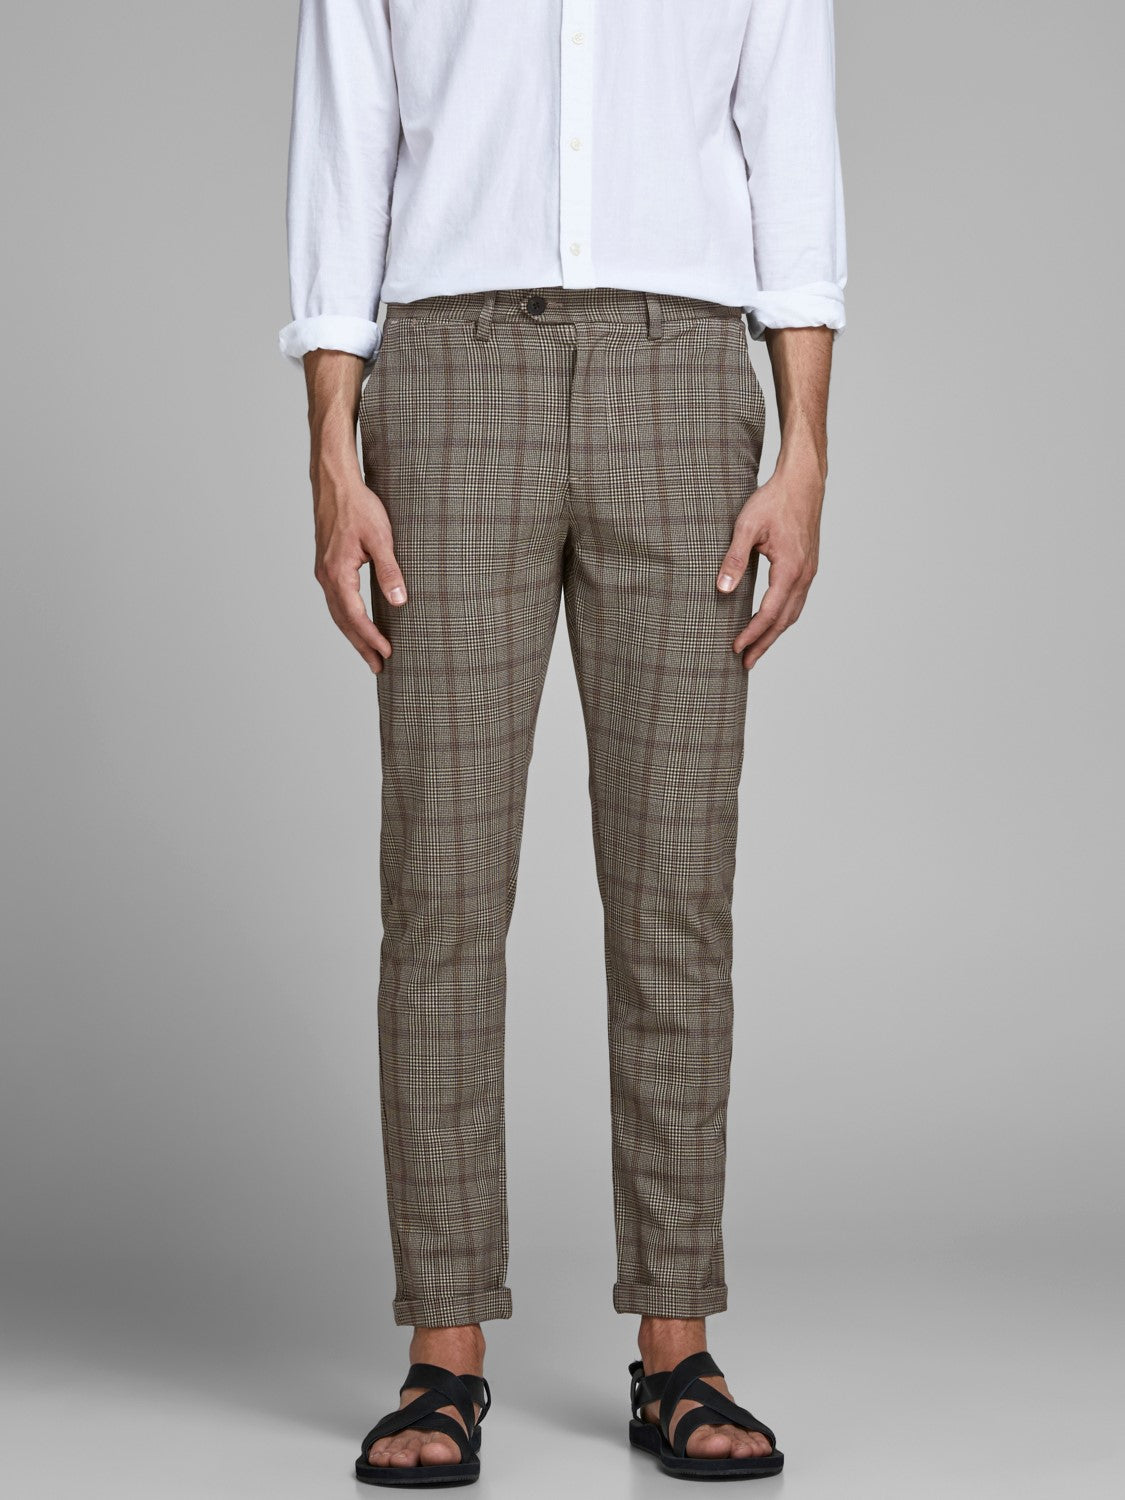 Marco Connor 775 Beige Check Pants - Spirit Clothing